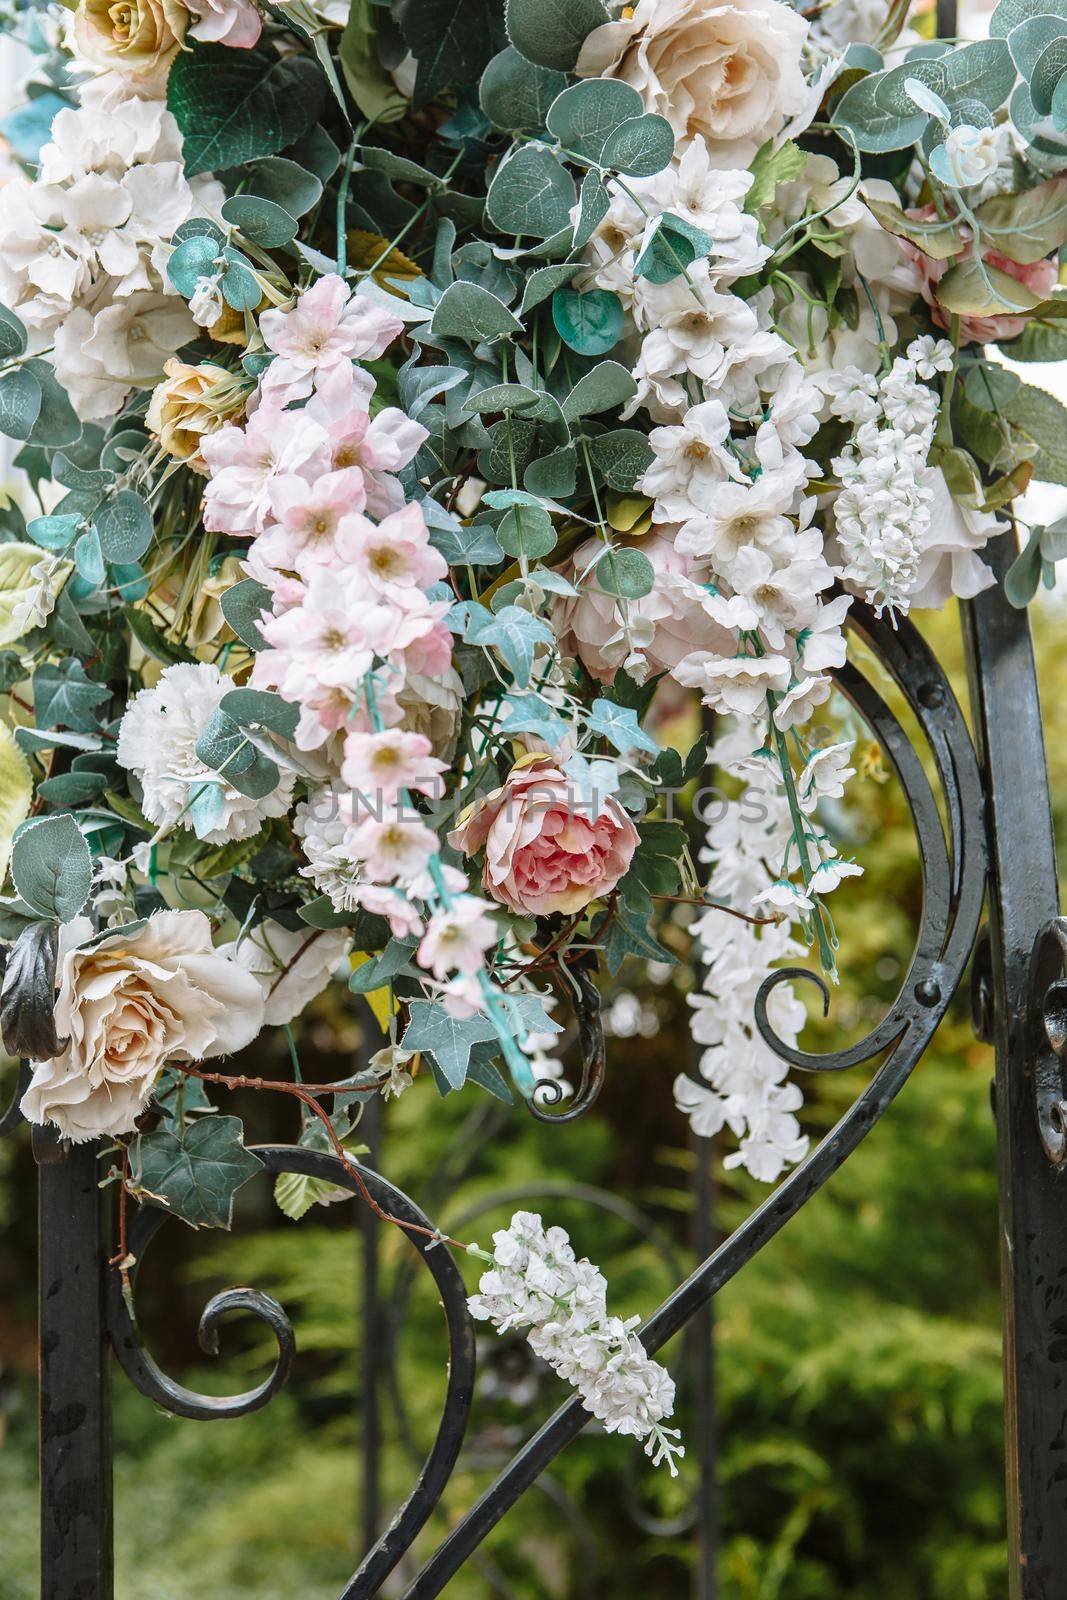 Decorative artificial flowers displayed on the street. Flowers are hanging on the bridge by deandy